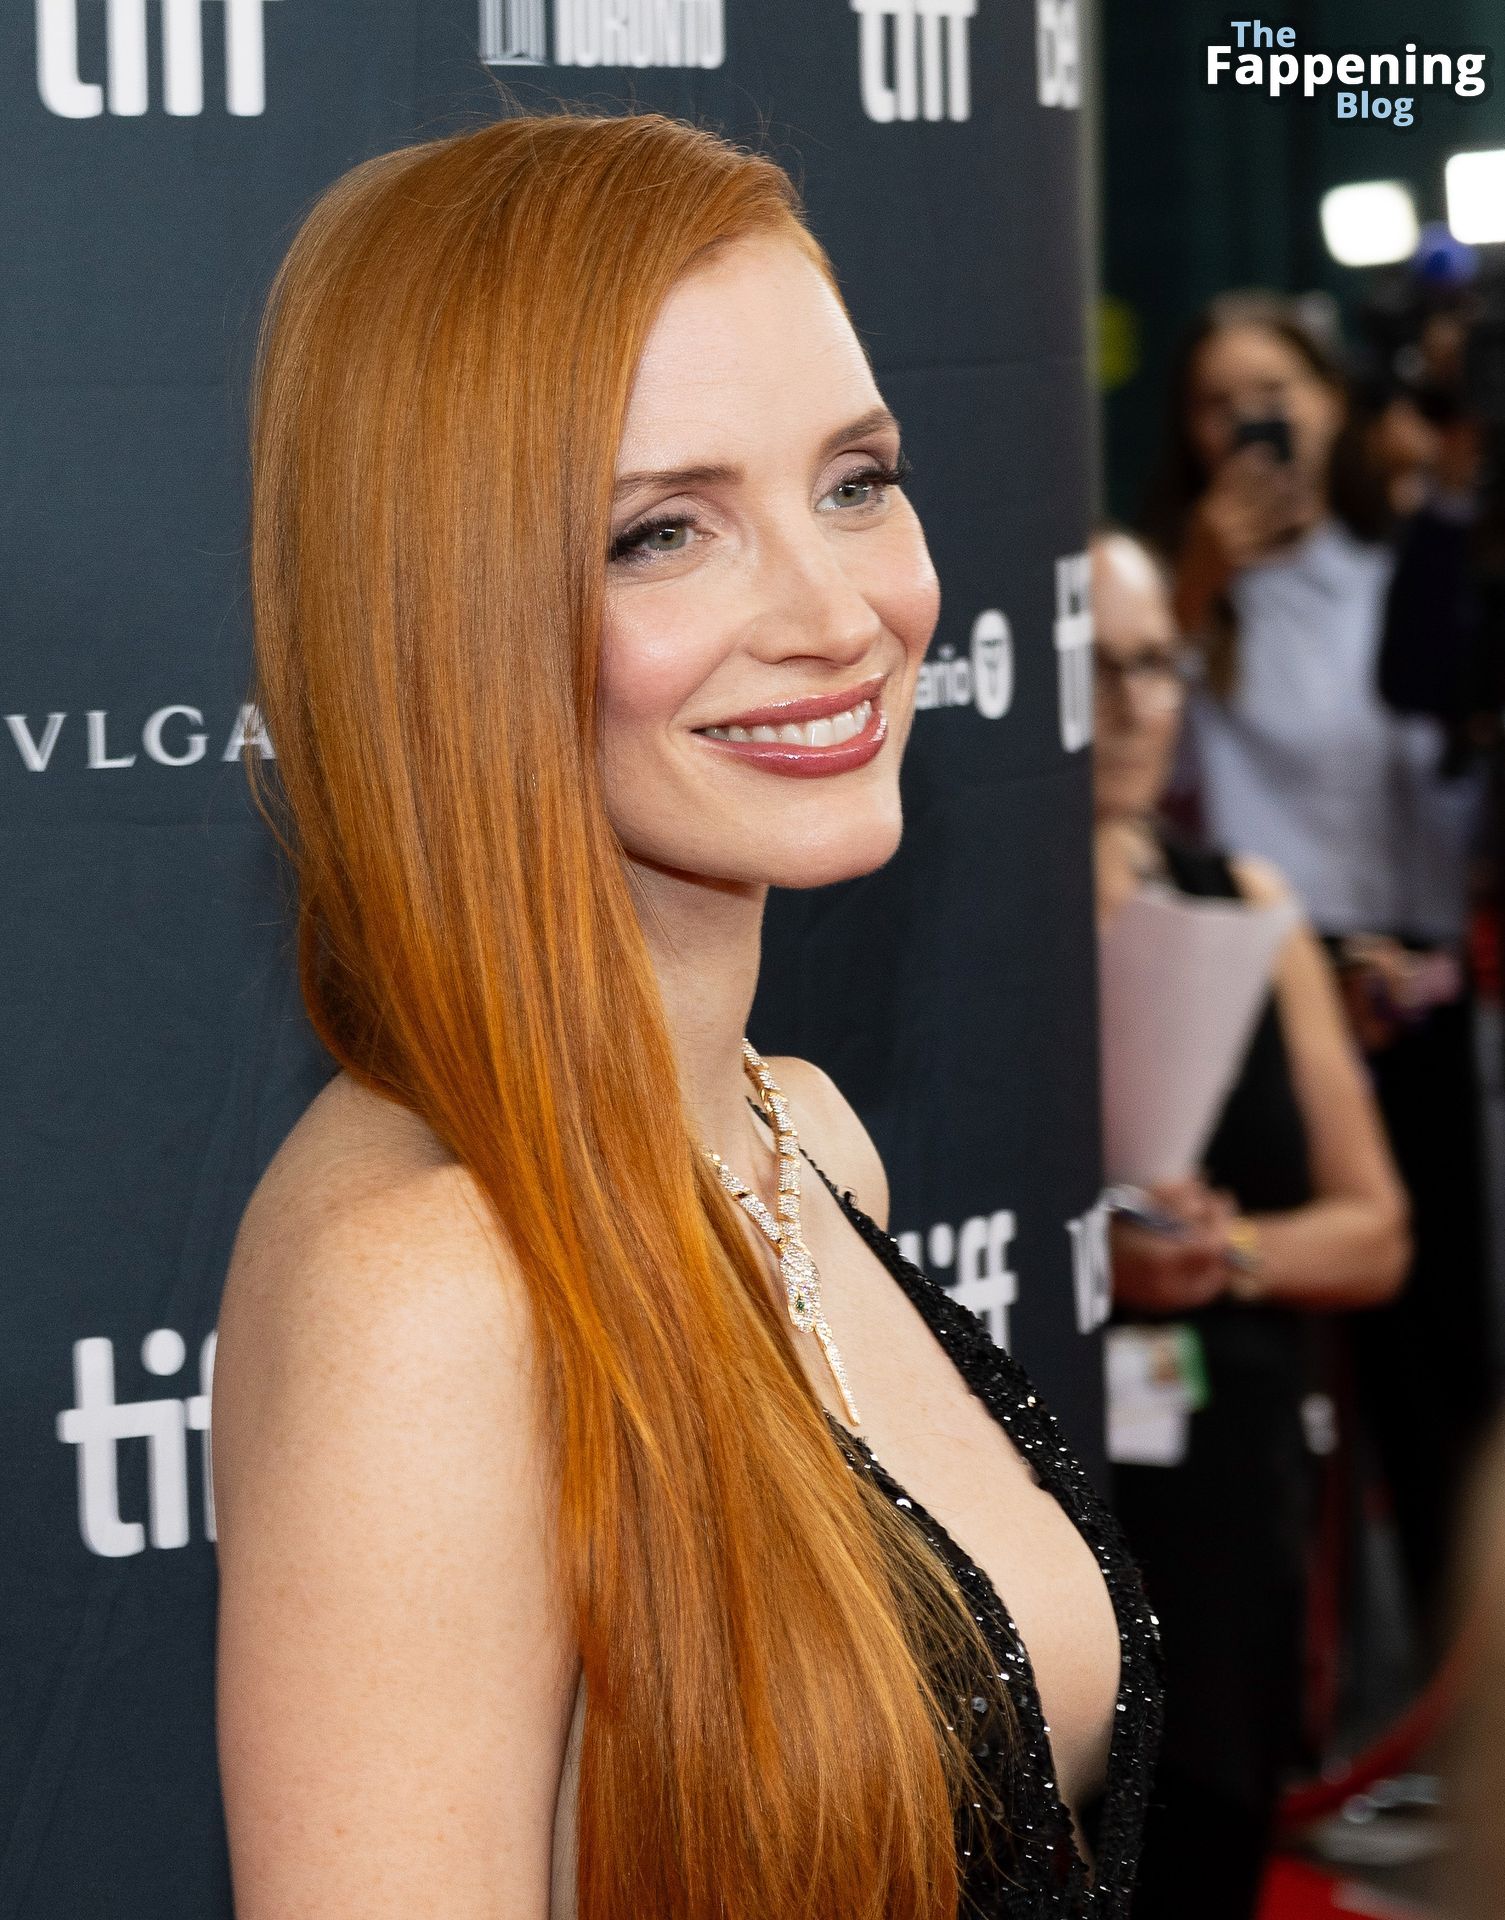 Jessica-Chastain-Sexy-45-The-Fappening-Blog.jpg